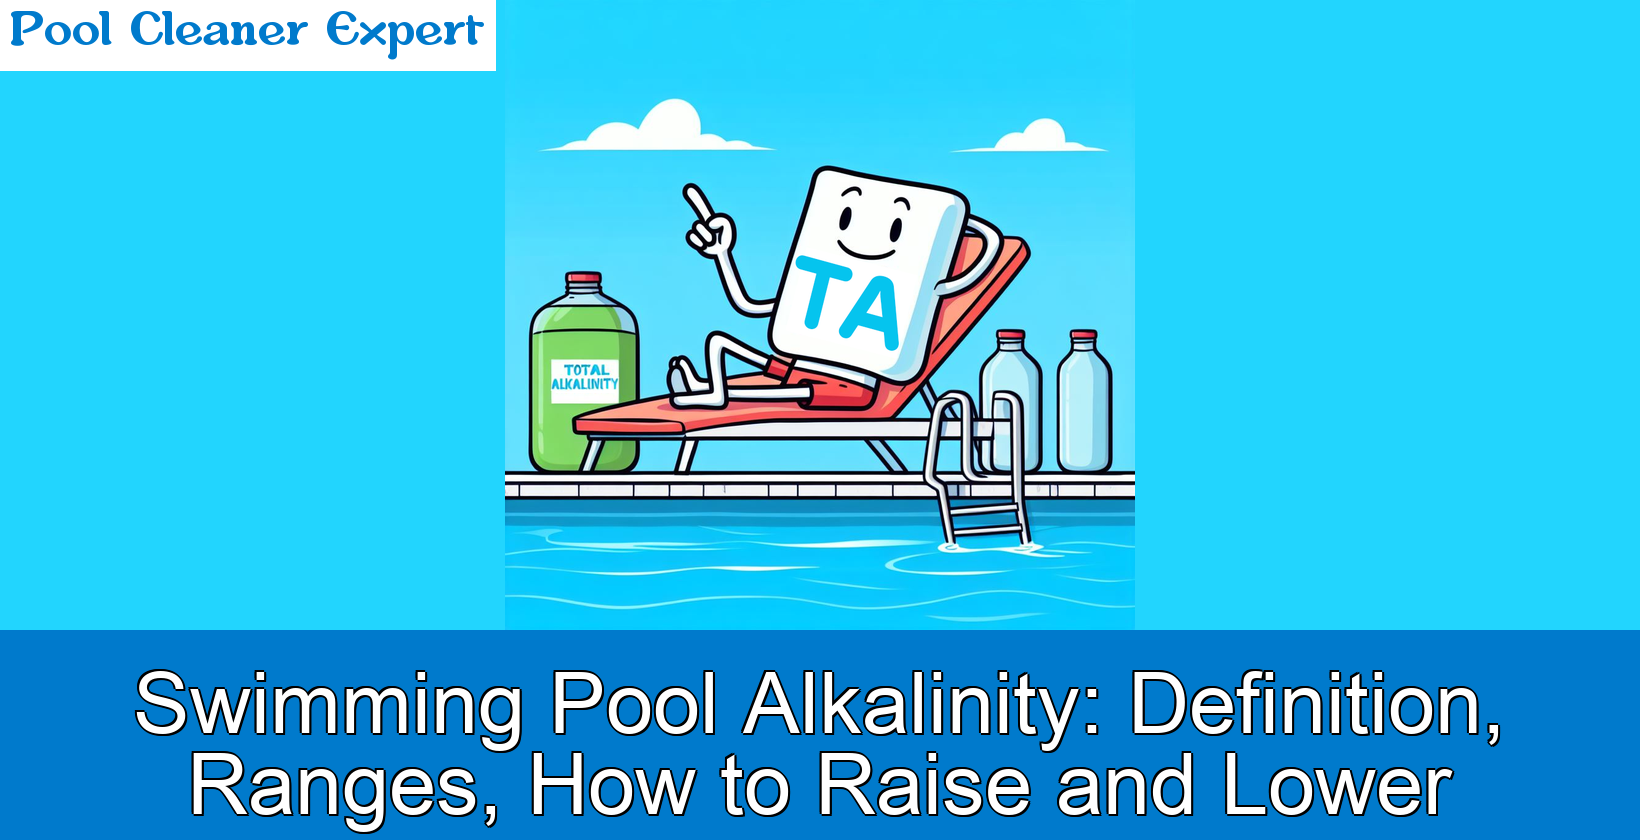 Swimming Pool Alkalinity: Definition, Ranges, How to Raise and Lower